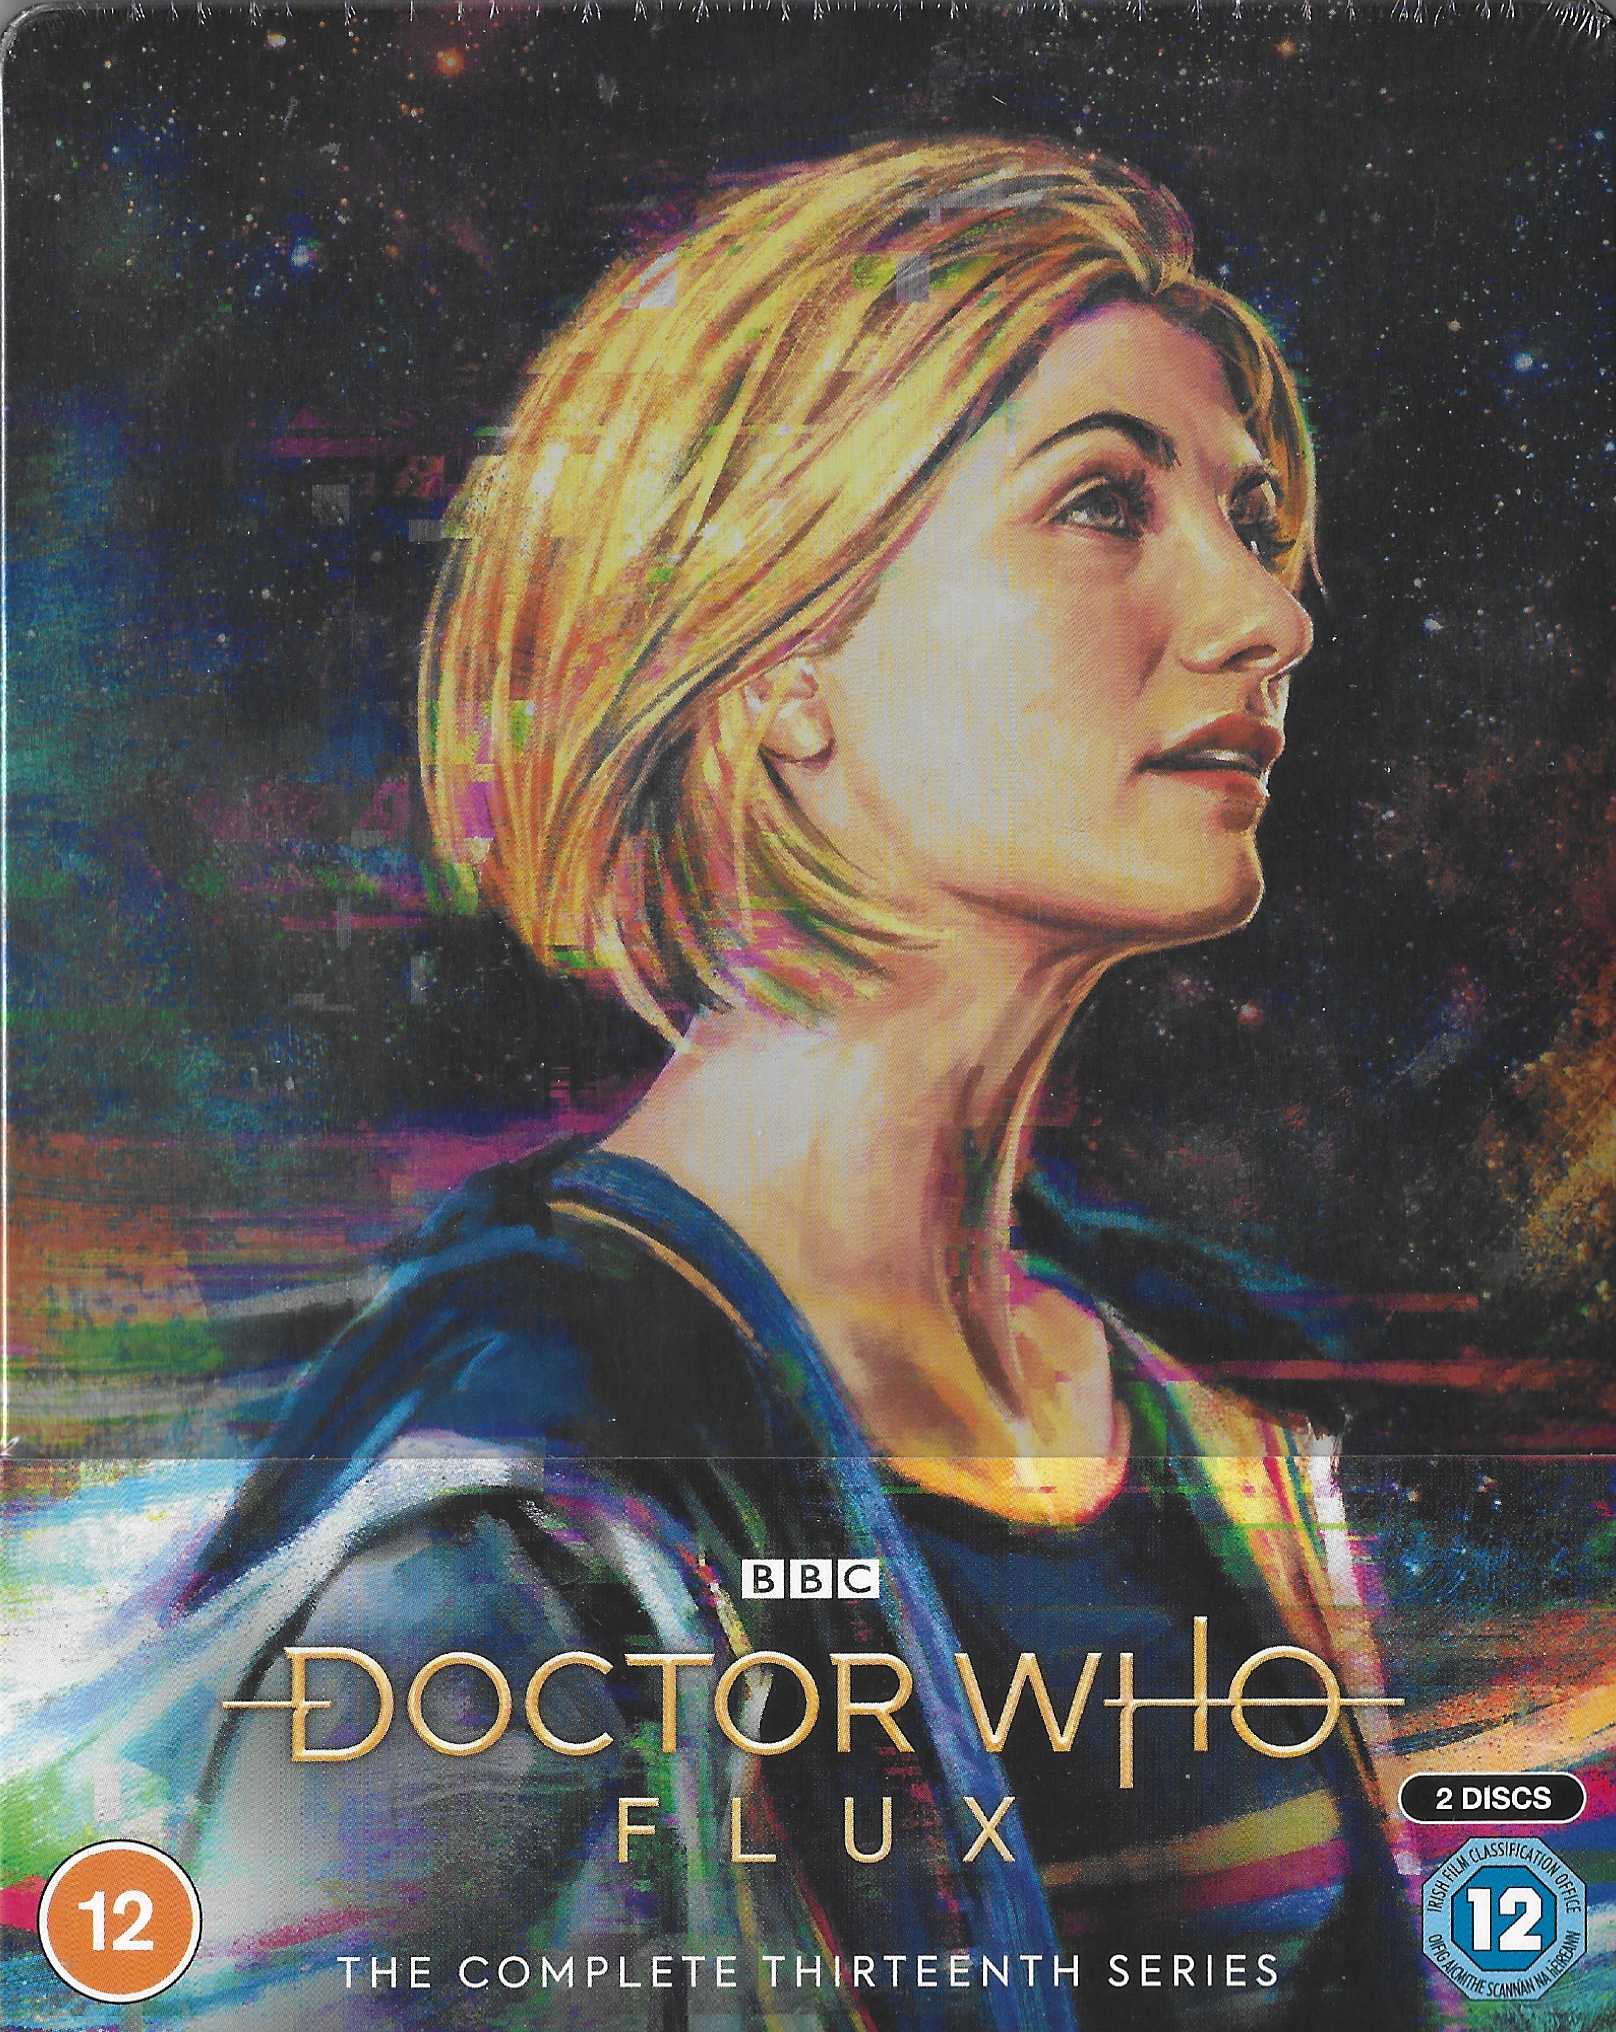 Picture of BBCBD 0554 Doctor Who - Flux (Limited Amazon steelbook edition) by artist Various from the BBC blu-rays - Records and Tapes library